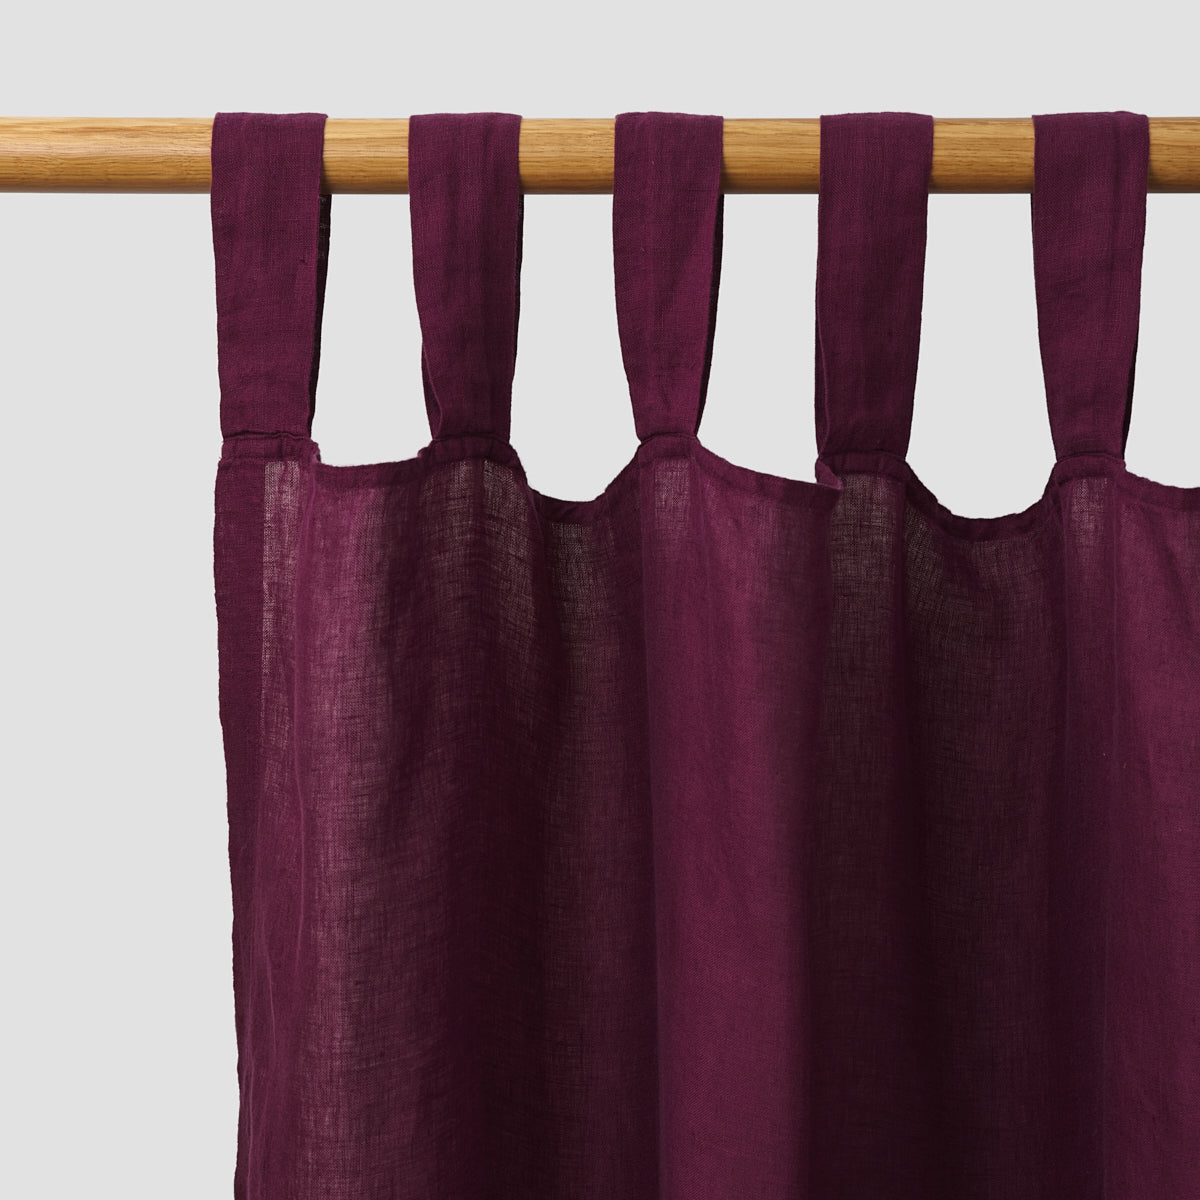 Berry Linen Curtains (Pair) - Piglet in Bed